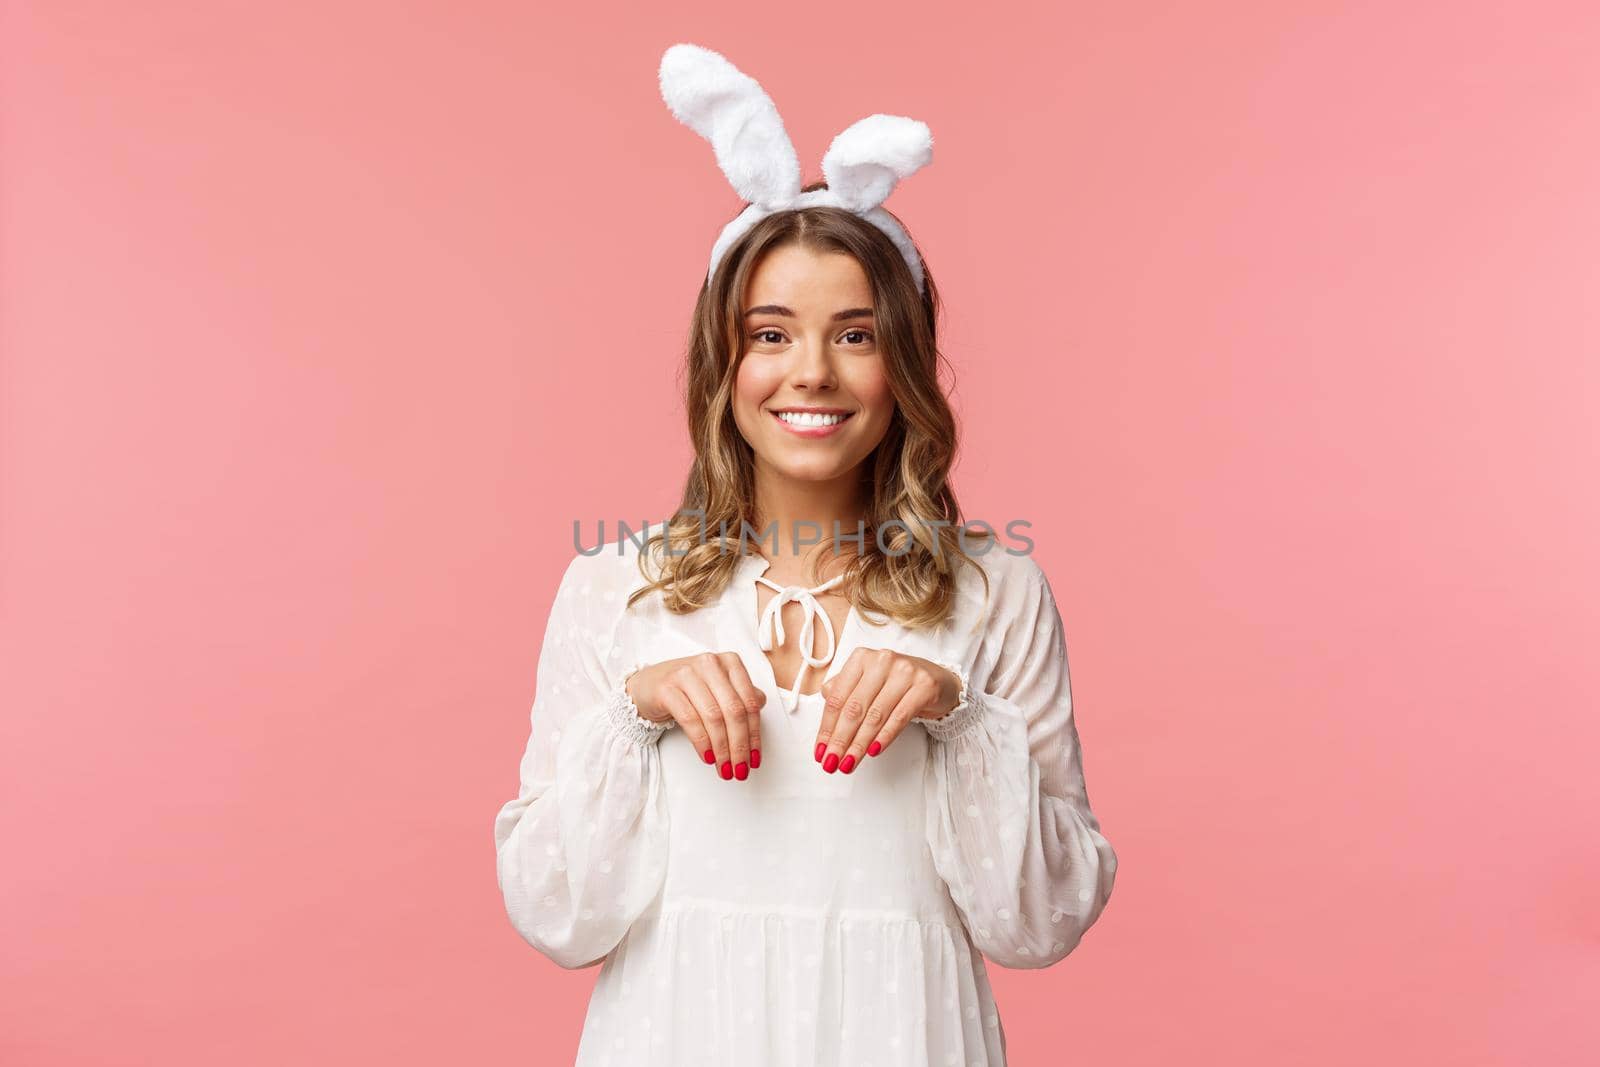 Holidays, spring and party concept. Portrait of cute and tender, lovely blond girl imitating bunny, holding hands like paws and wearing rabbit ears, smiling camera, pink background.